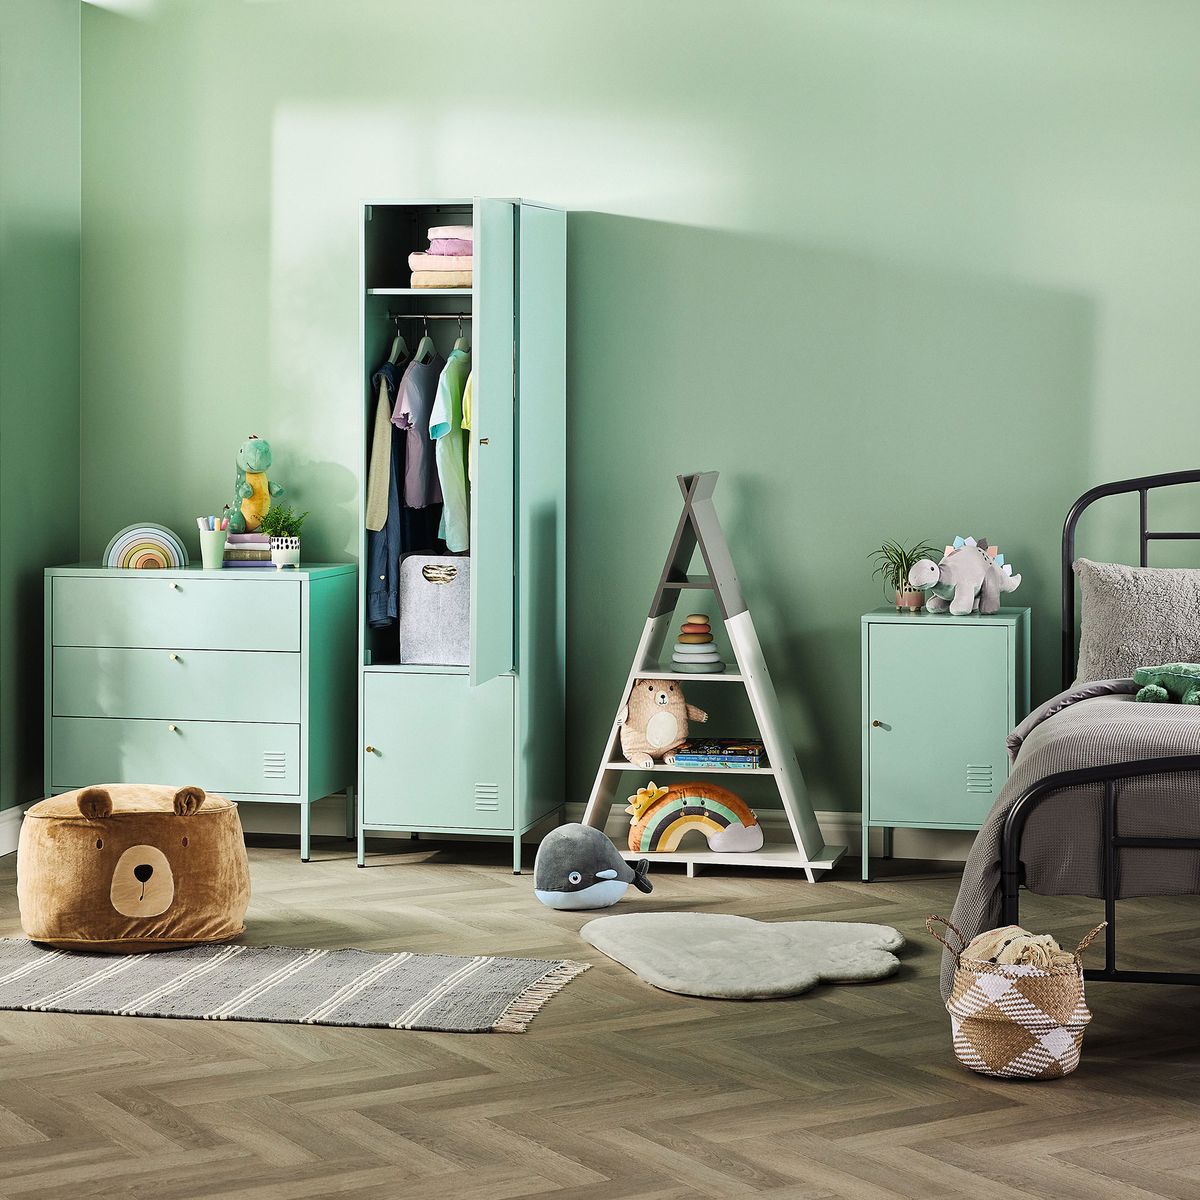 Aldi’s new kids bedroom furniture is so chic we want it for our own bedrooms